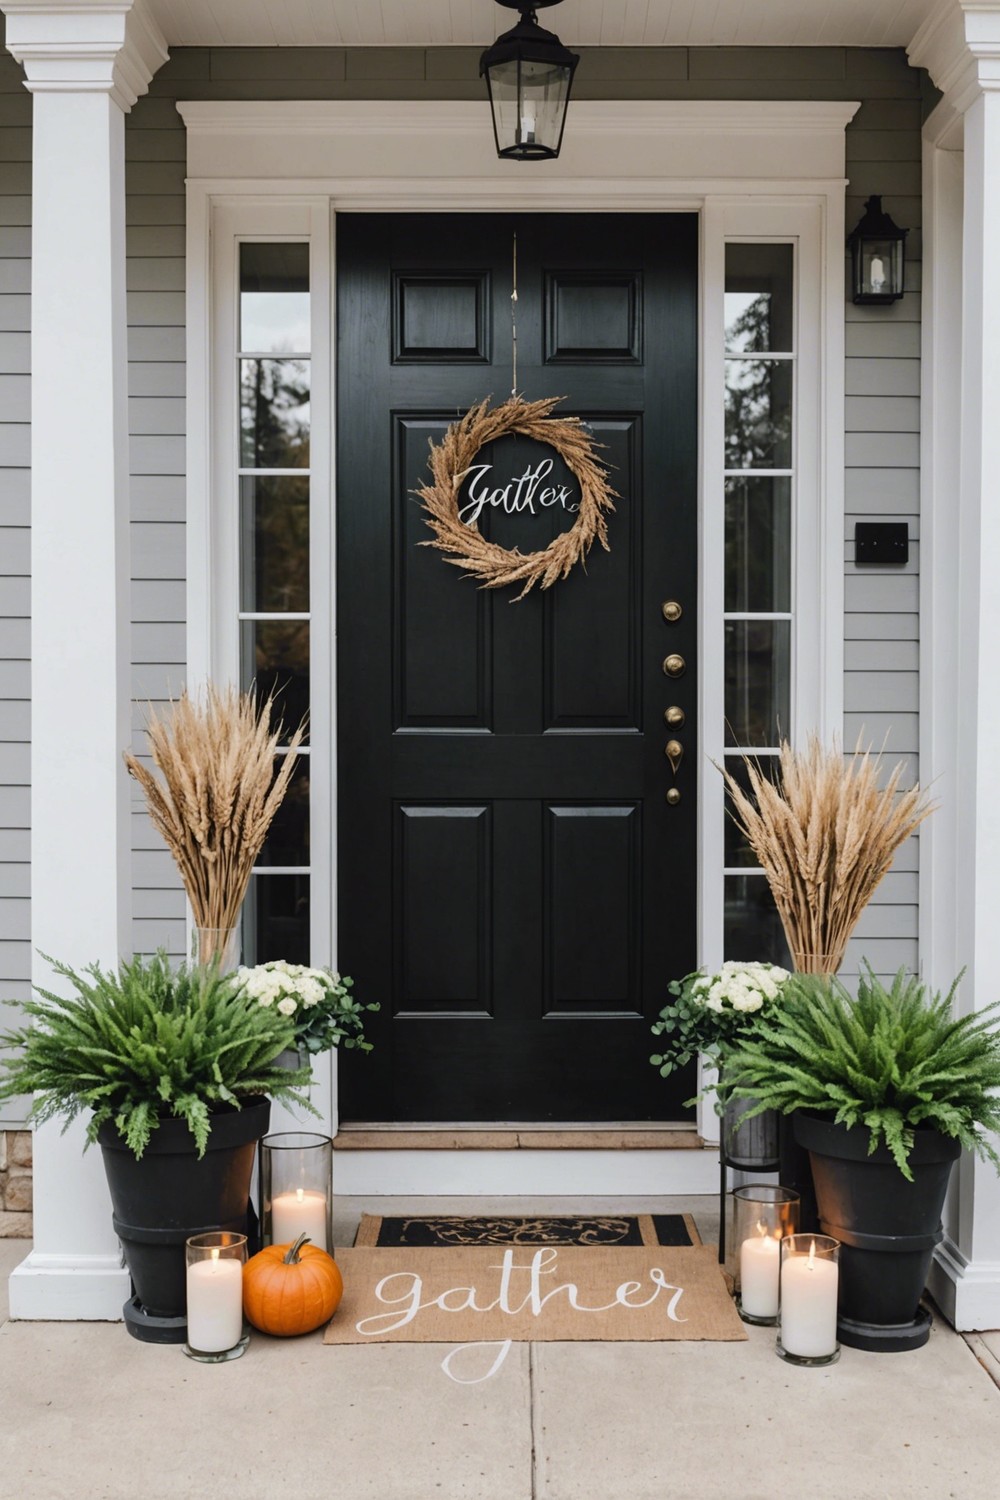 Modern Fall Signs and Decor